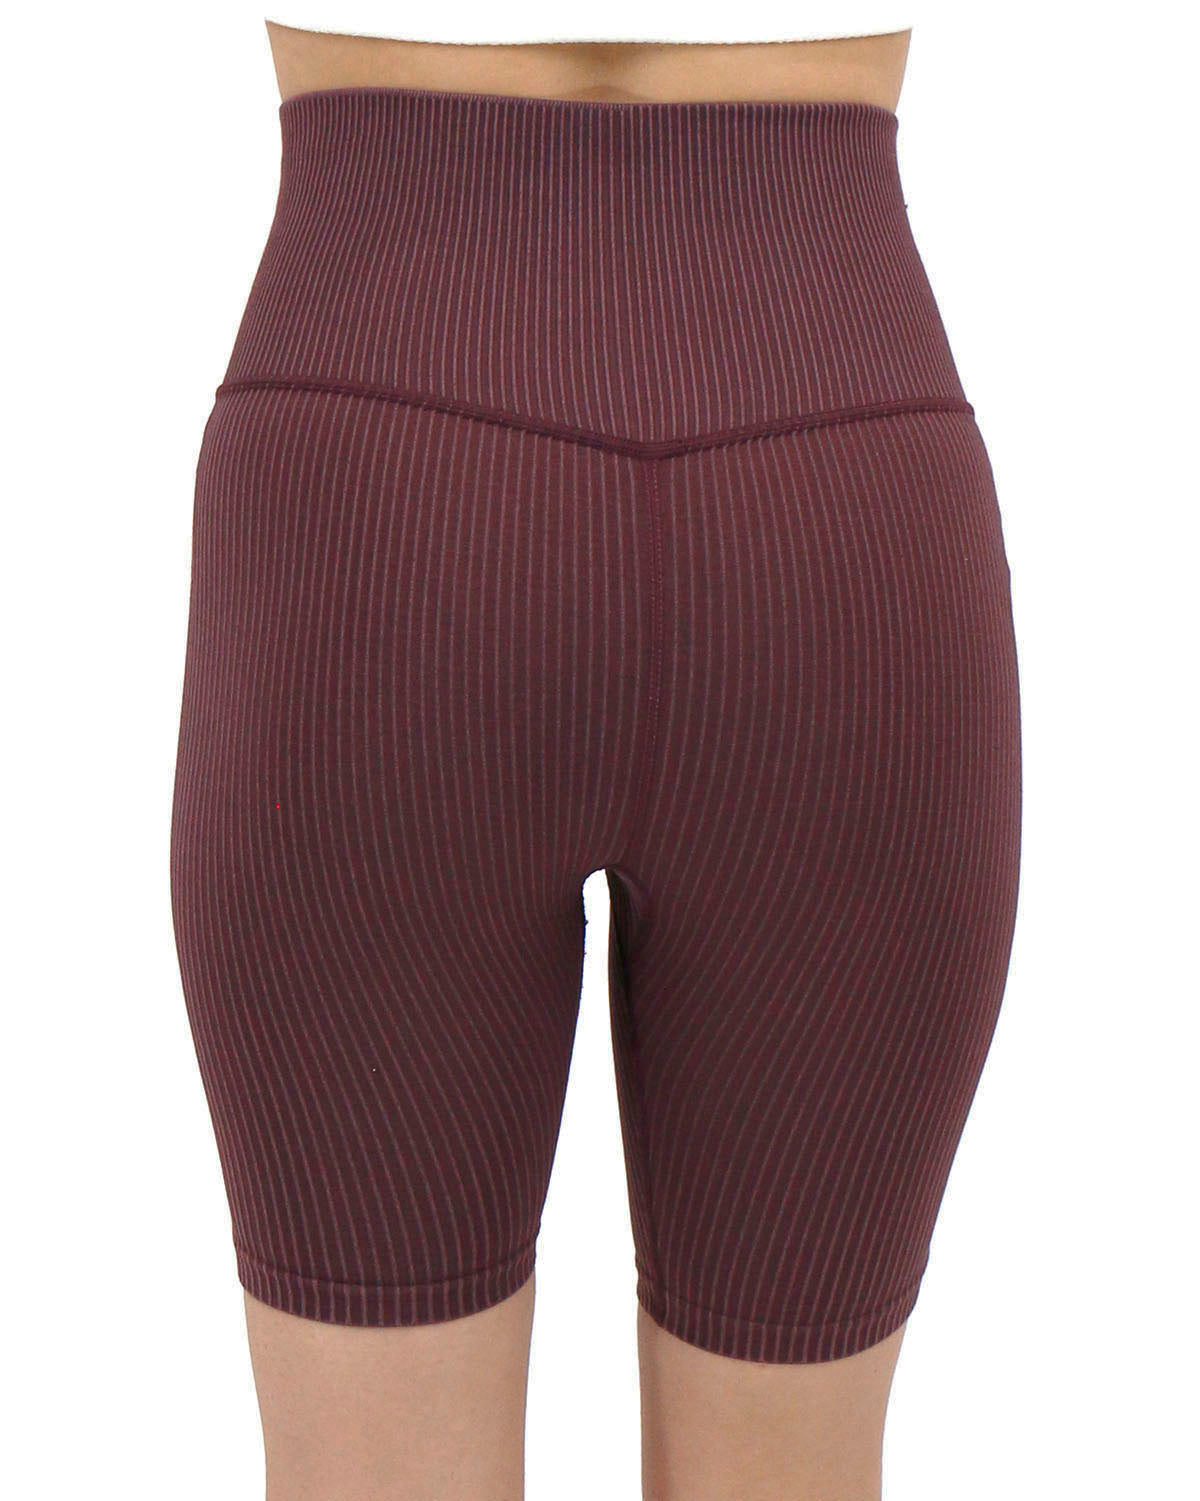 Perfect Fit Ribbed Biker Shorts in Raisin - Grace and Lace